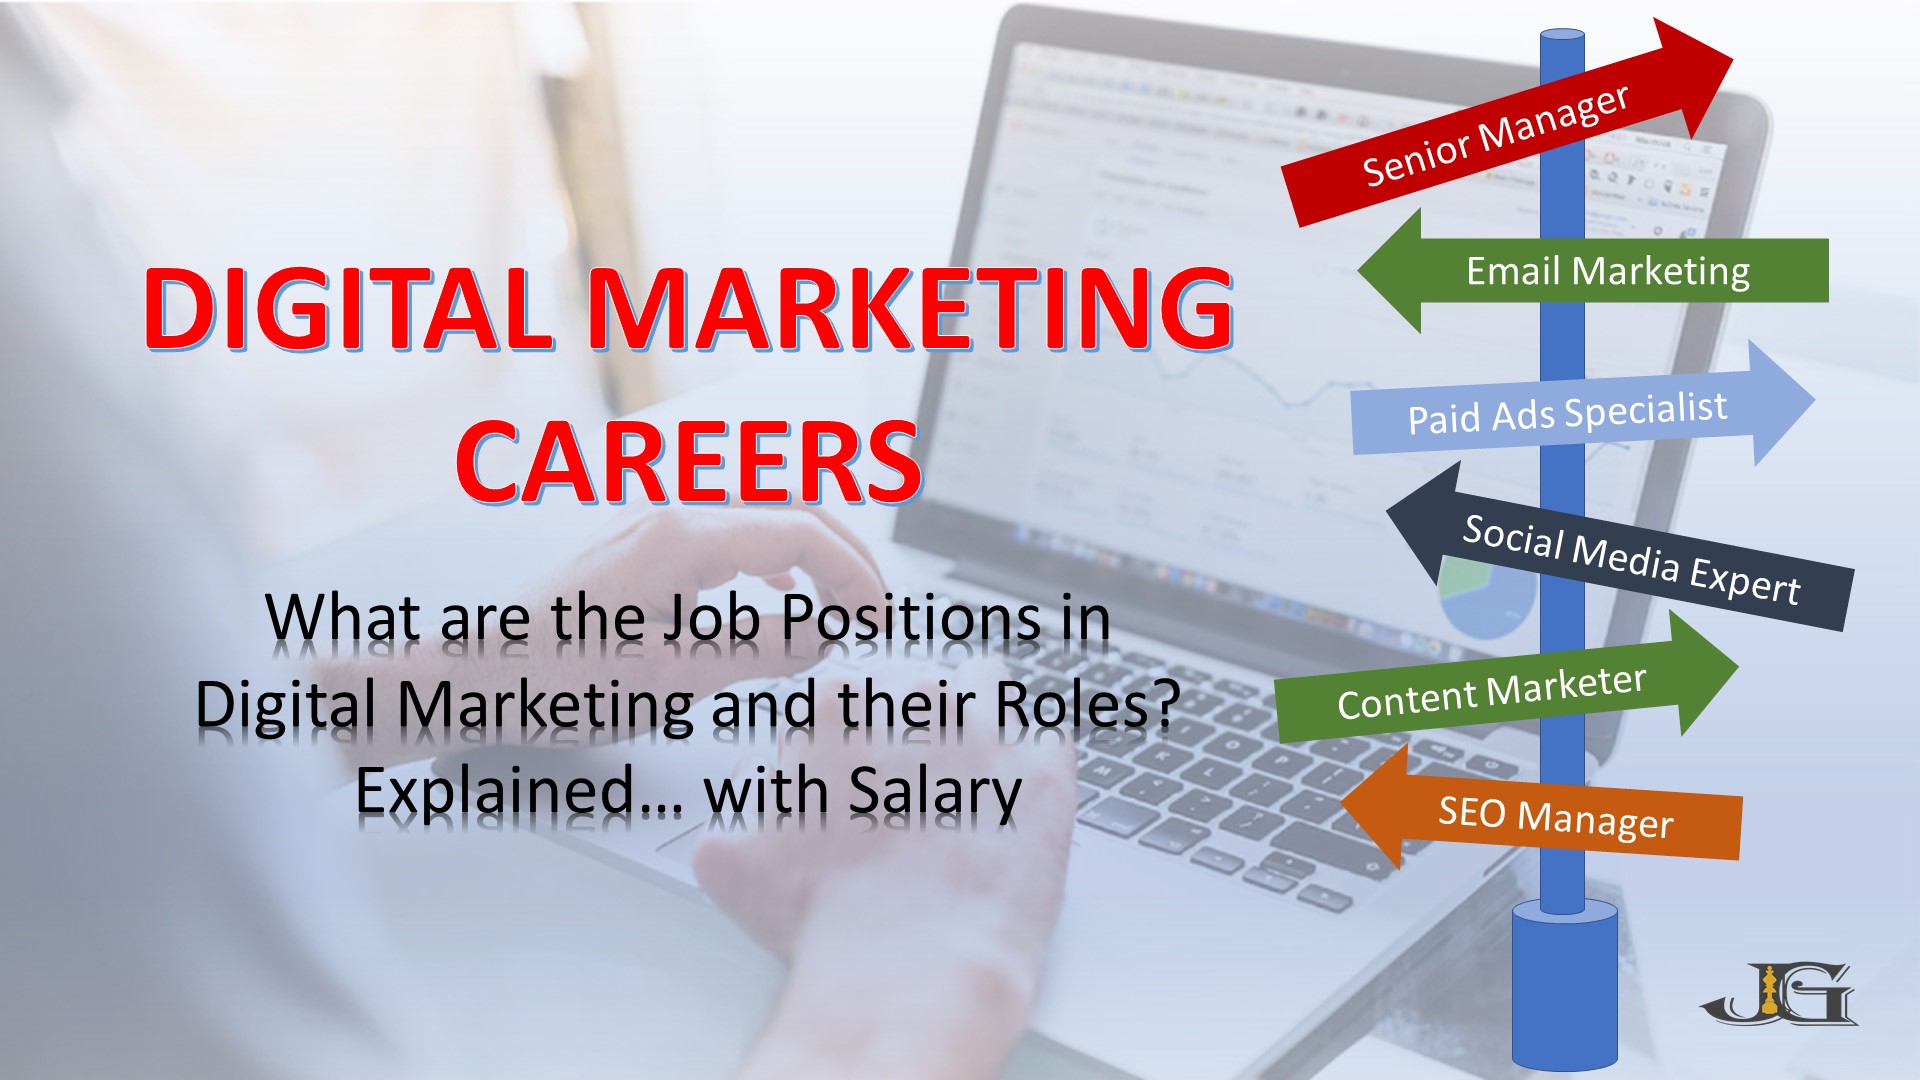 Digital Marketing Careers: What are the Job Positions in Digital